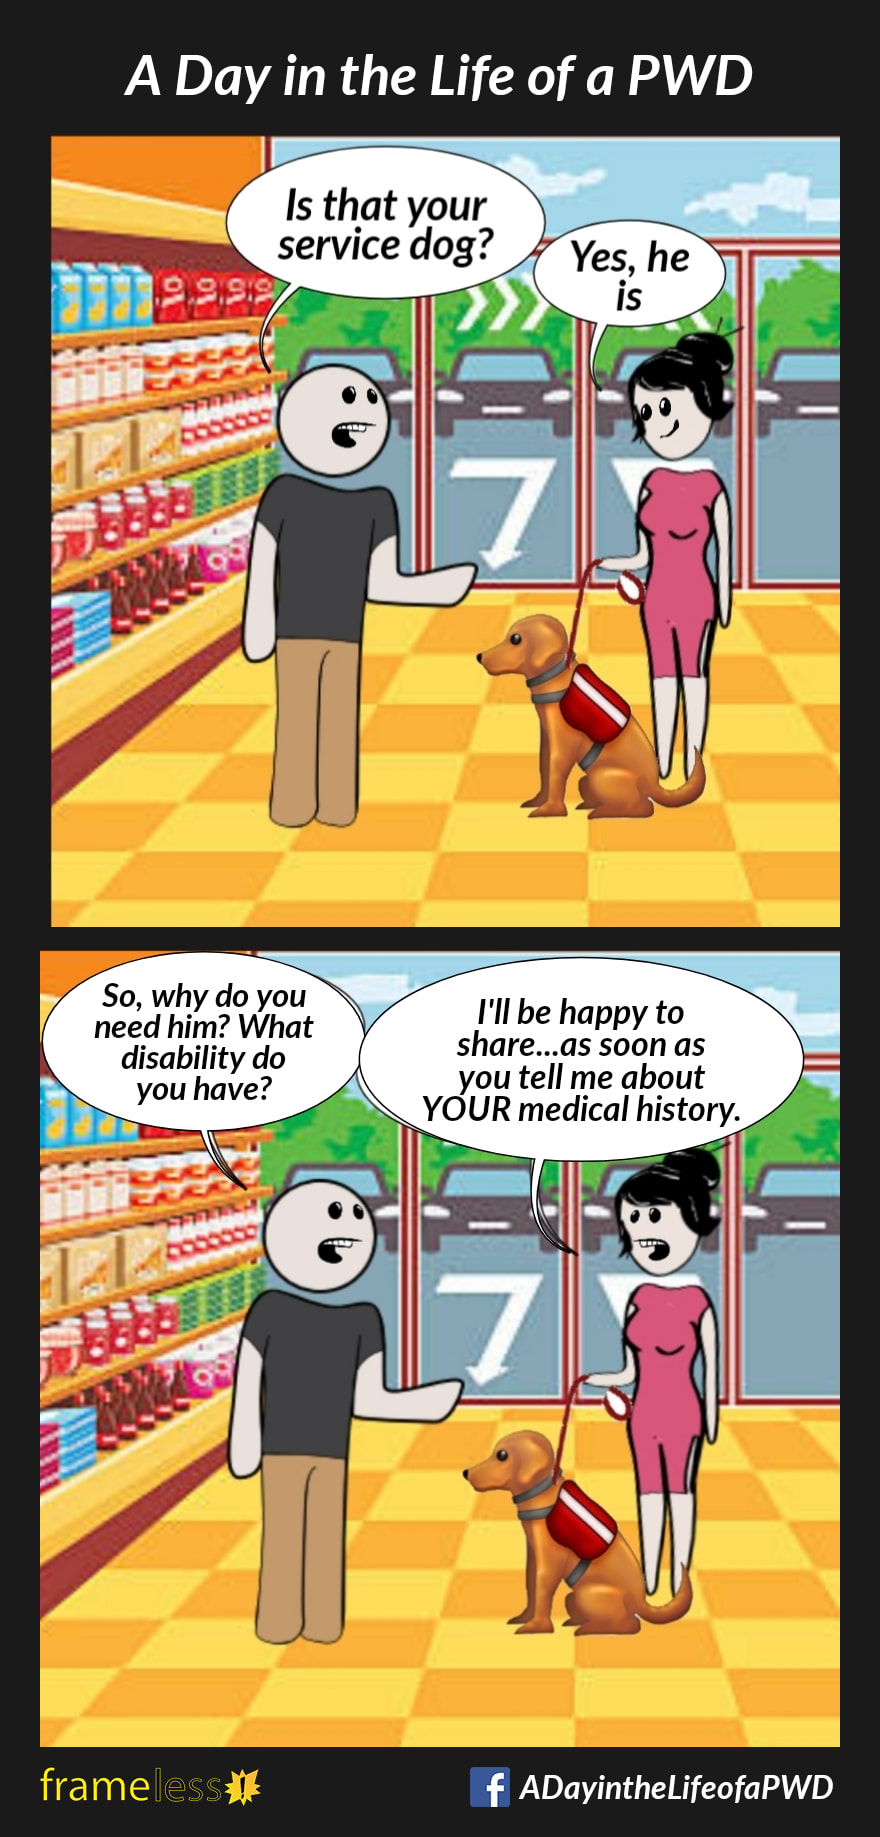 COMIC STRIP 
A Day in the Life of a PWD (Person With a Disability) 

Frame 1:
A woman has entered a supermarket with her service dog. A clerk stops her.
CLERK: Is that your service dog?
WOMAN: Yes, he is

Frame 2:
CLERK: So, why do you need him? What disability do you have?
WOMAN: I'll be happy to share...as soon as you tell me about YOUR medical history